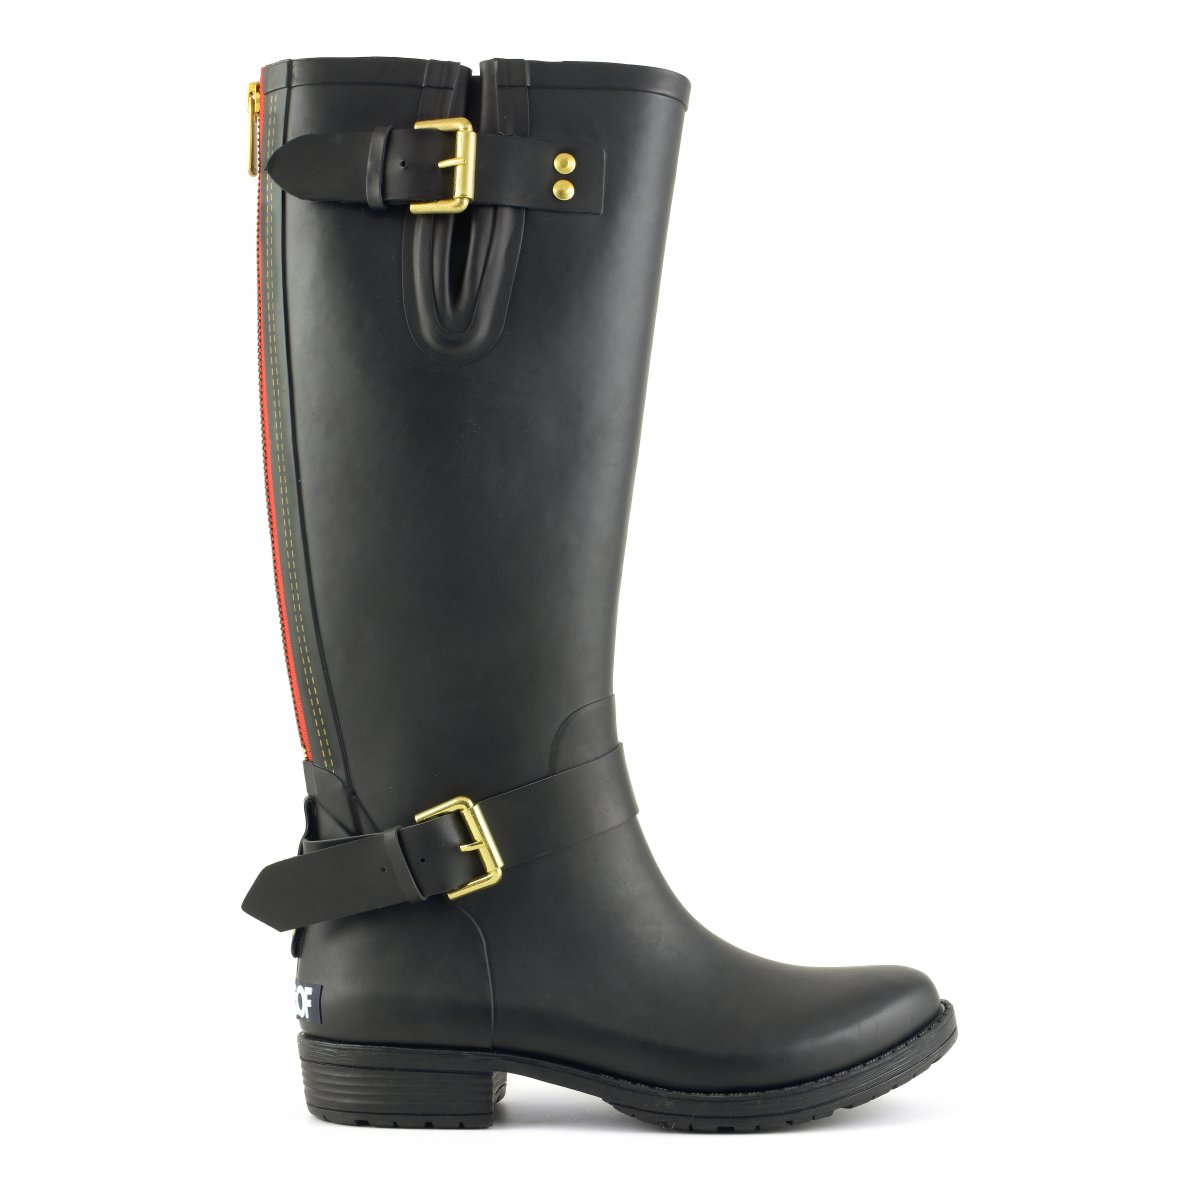 Long rubber rain-boot with side zip - New Arrivals Colors of California ...